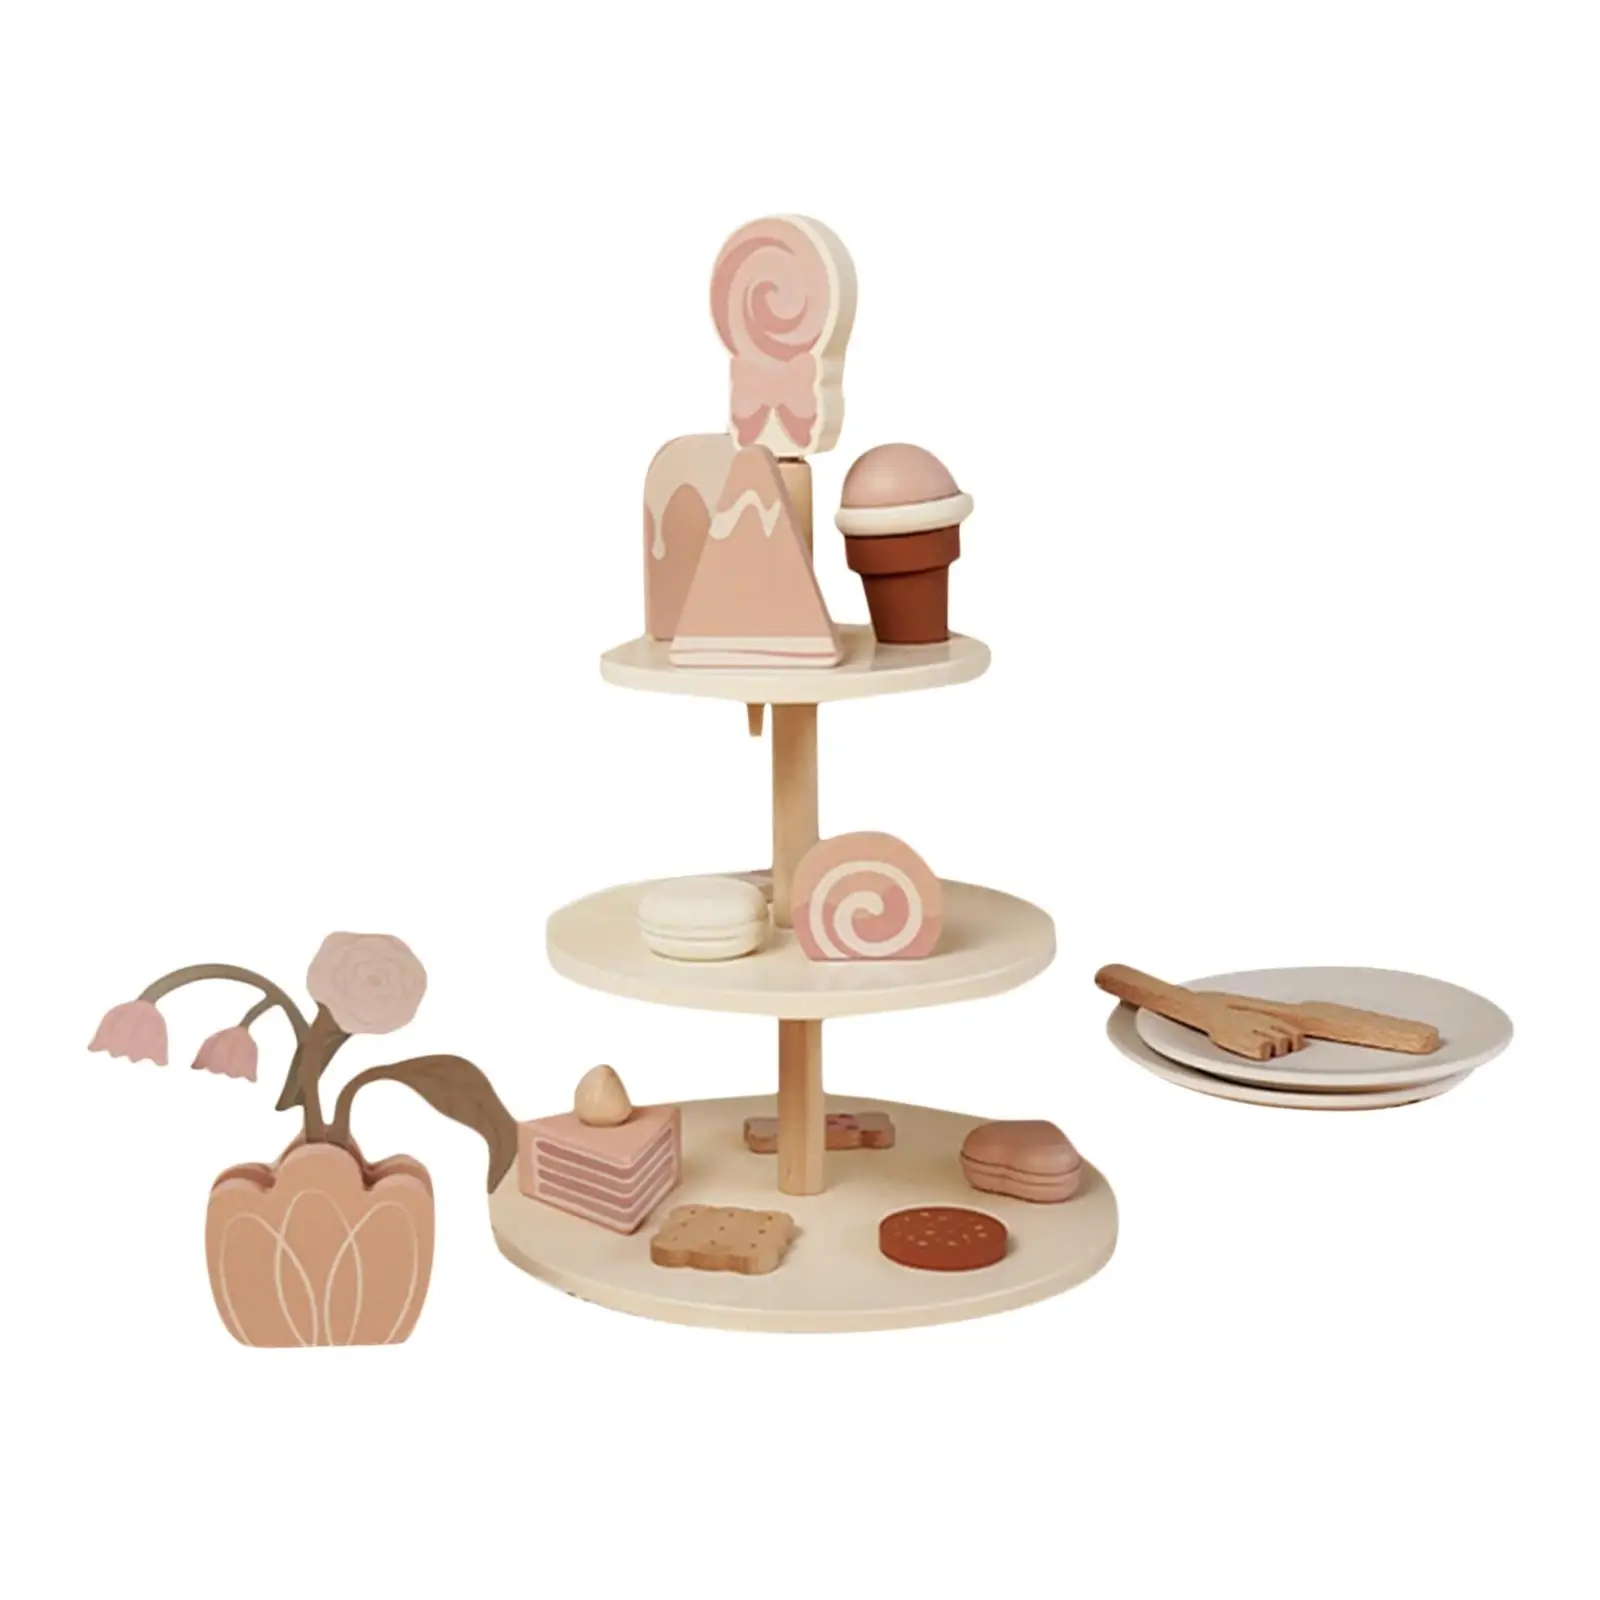 Wooden Little Girls Tea Party Set Mini Kitchen Gifts Toys for Party Favor